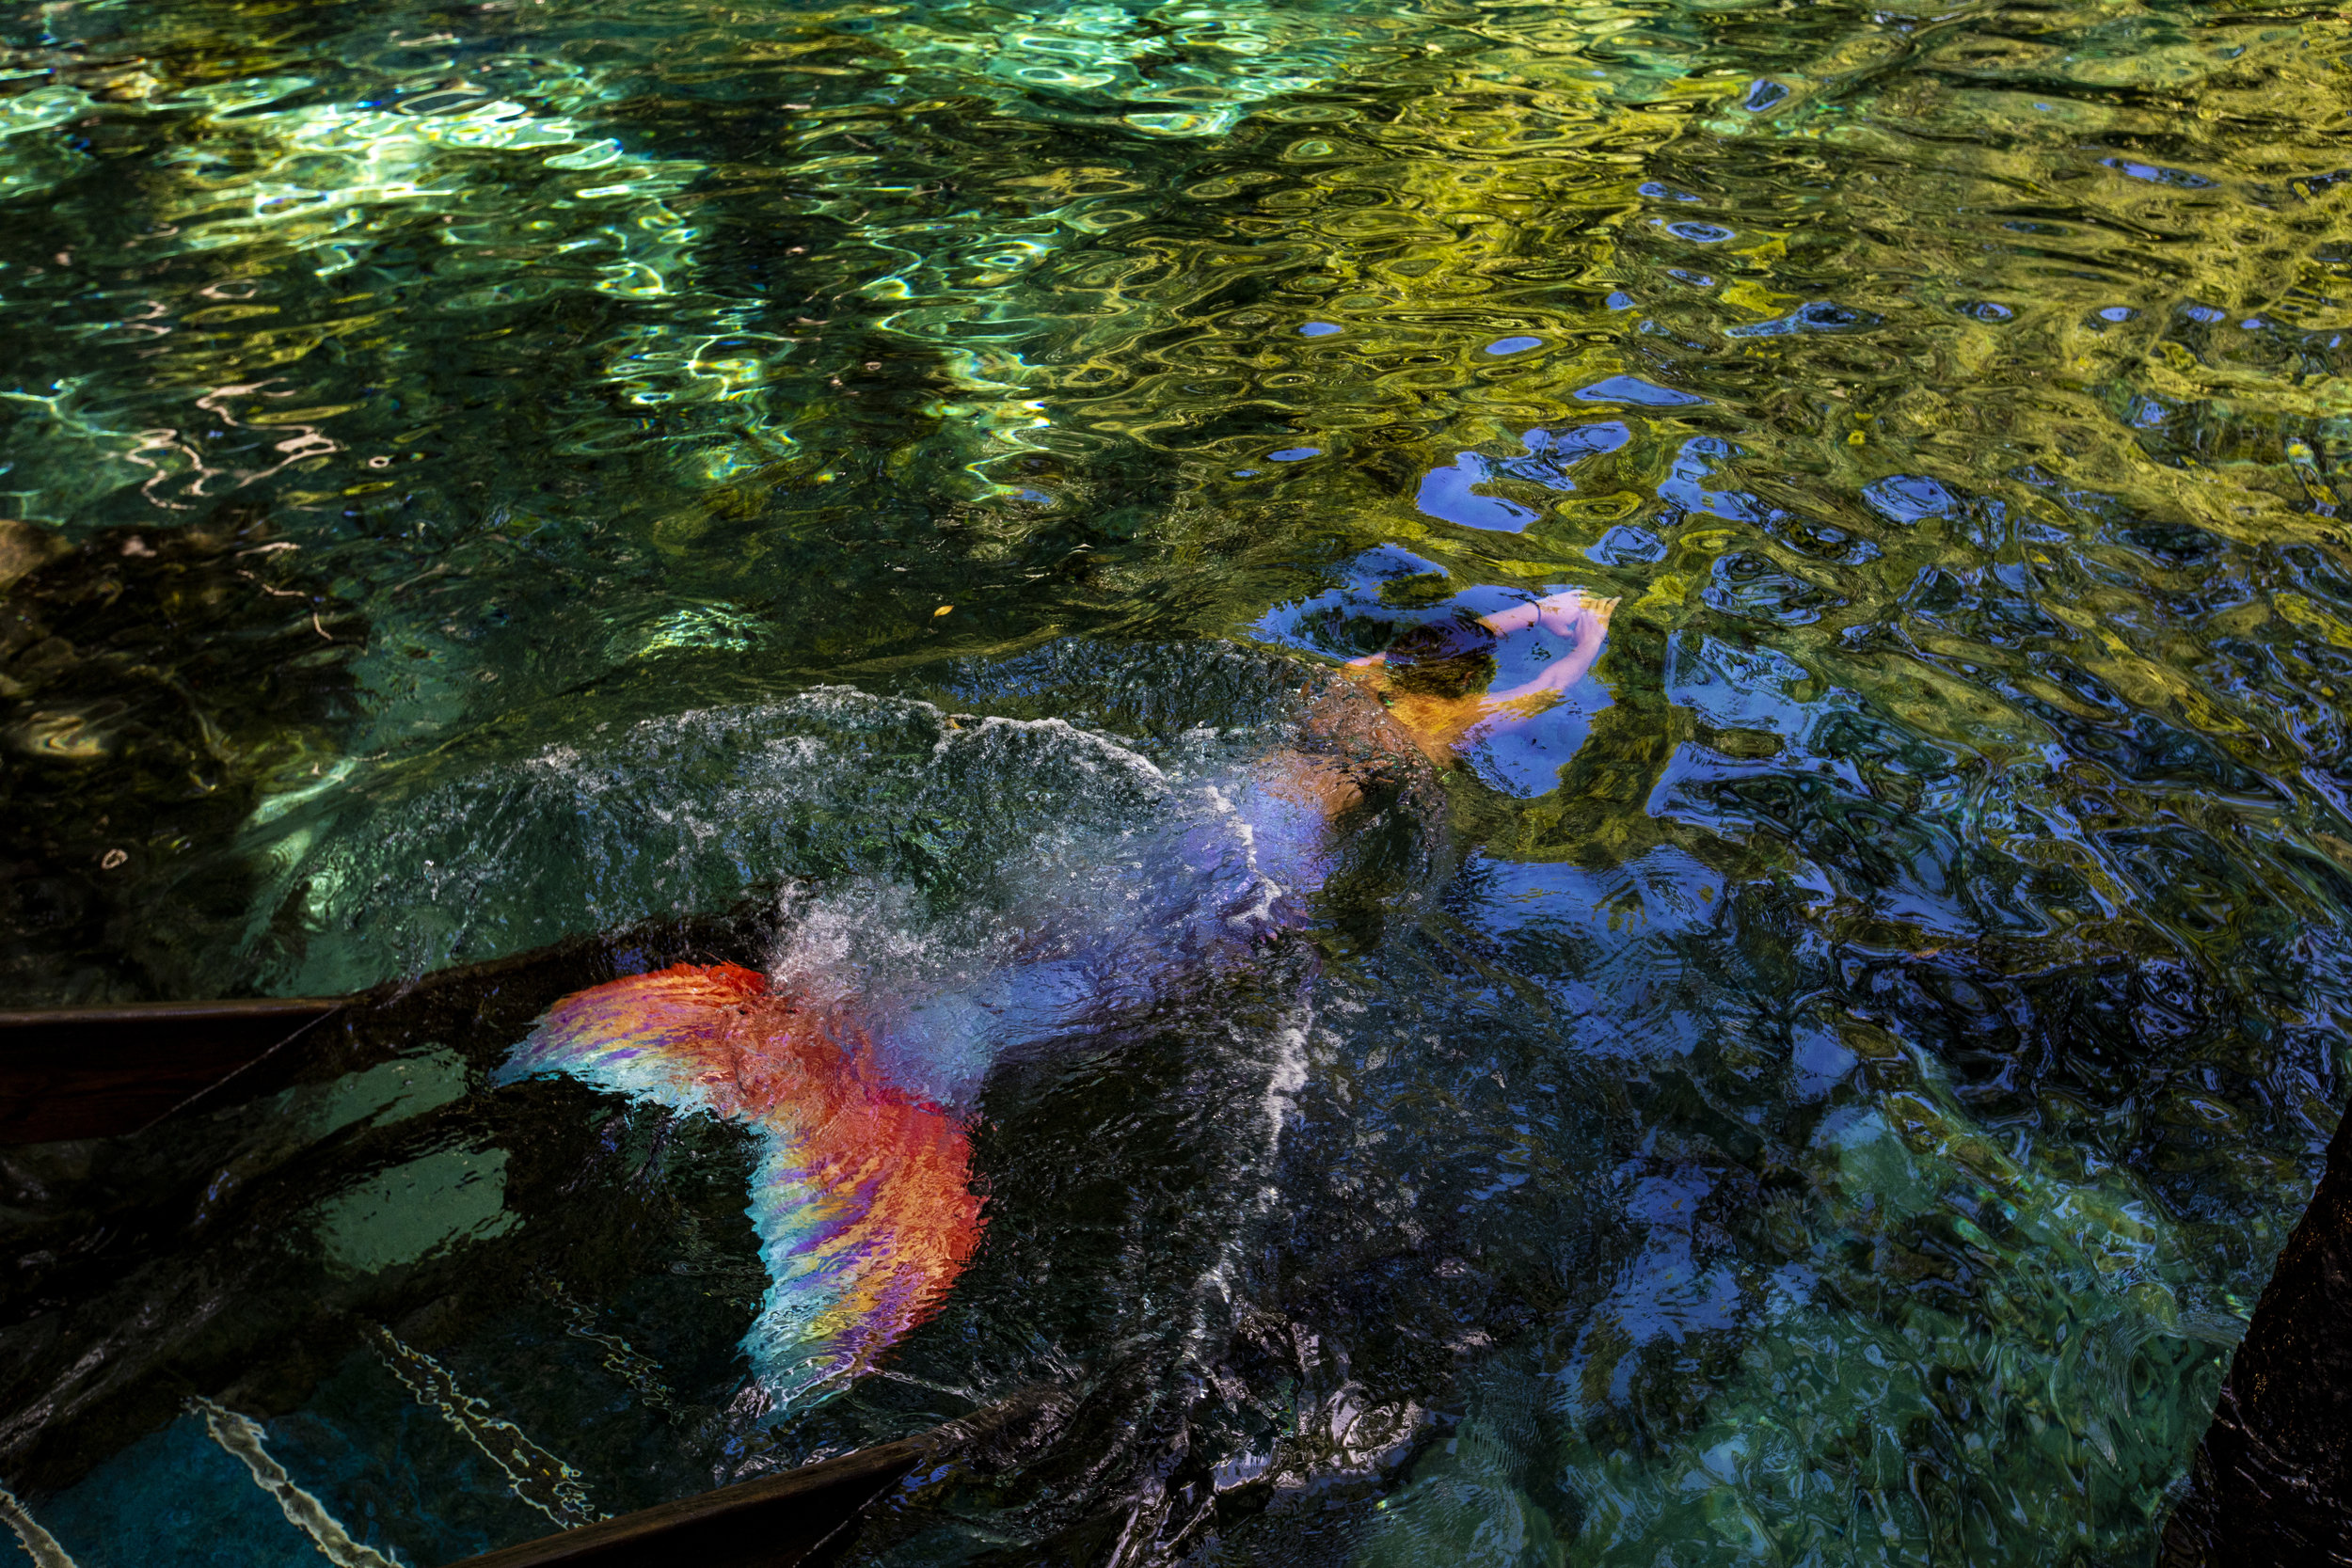  Tami Baker dives into Ginnie Springs with a mermaid tail on August 3, 2018. Baker uses coconut oil to slide into her tail before entering the water. 